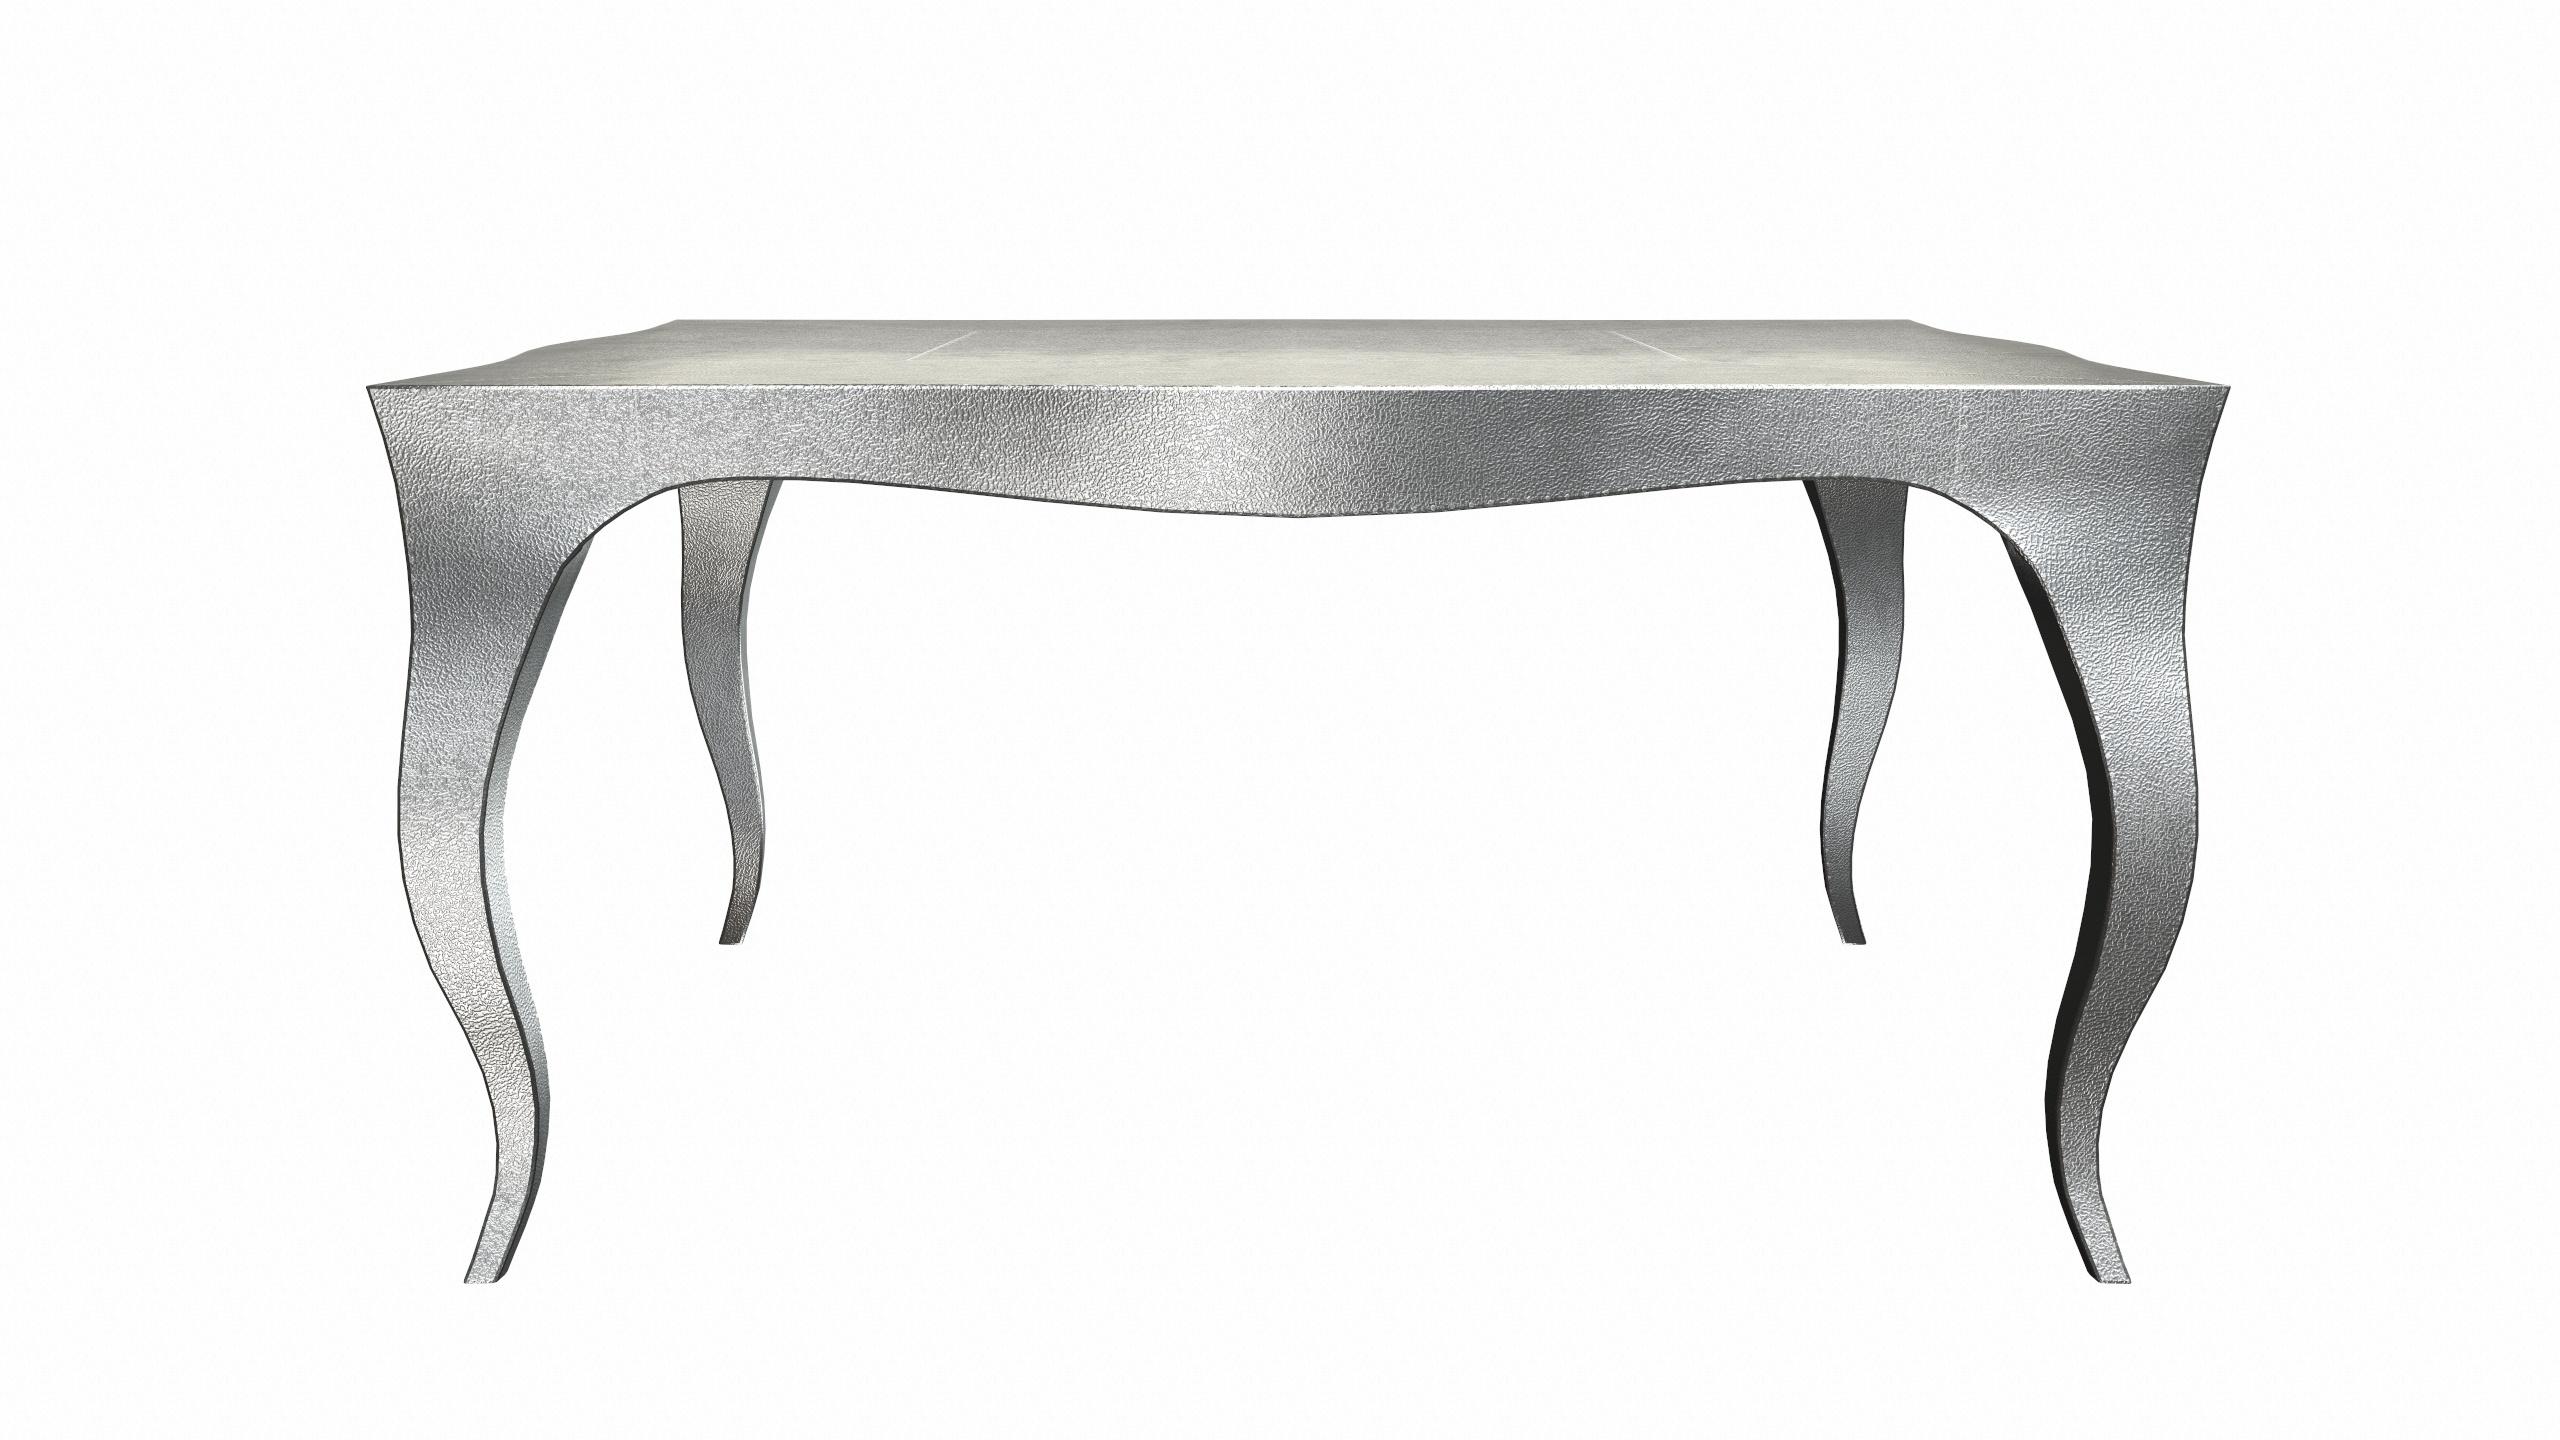 American Louise Art Deco Center Tables Fine Hammered White Bronze by Paul Mathieu For Sale